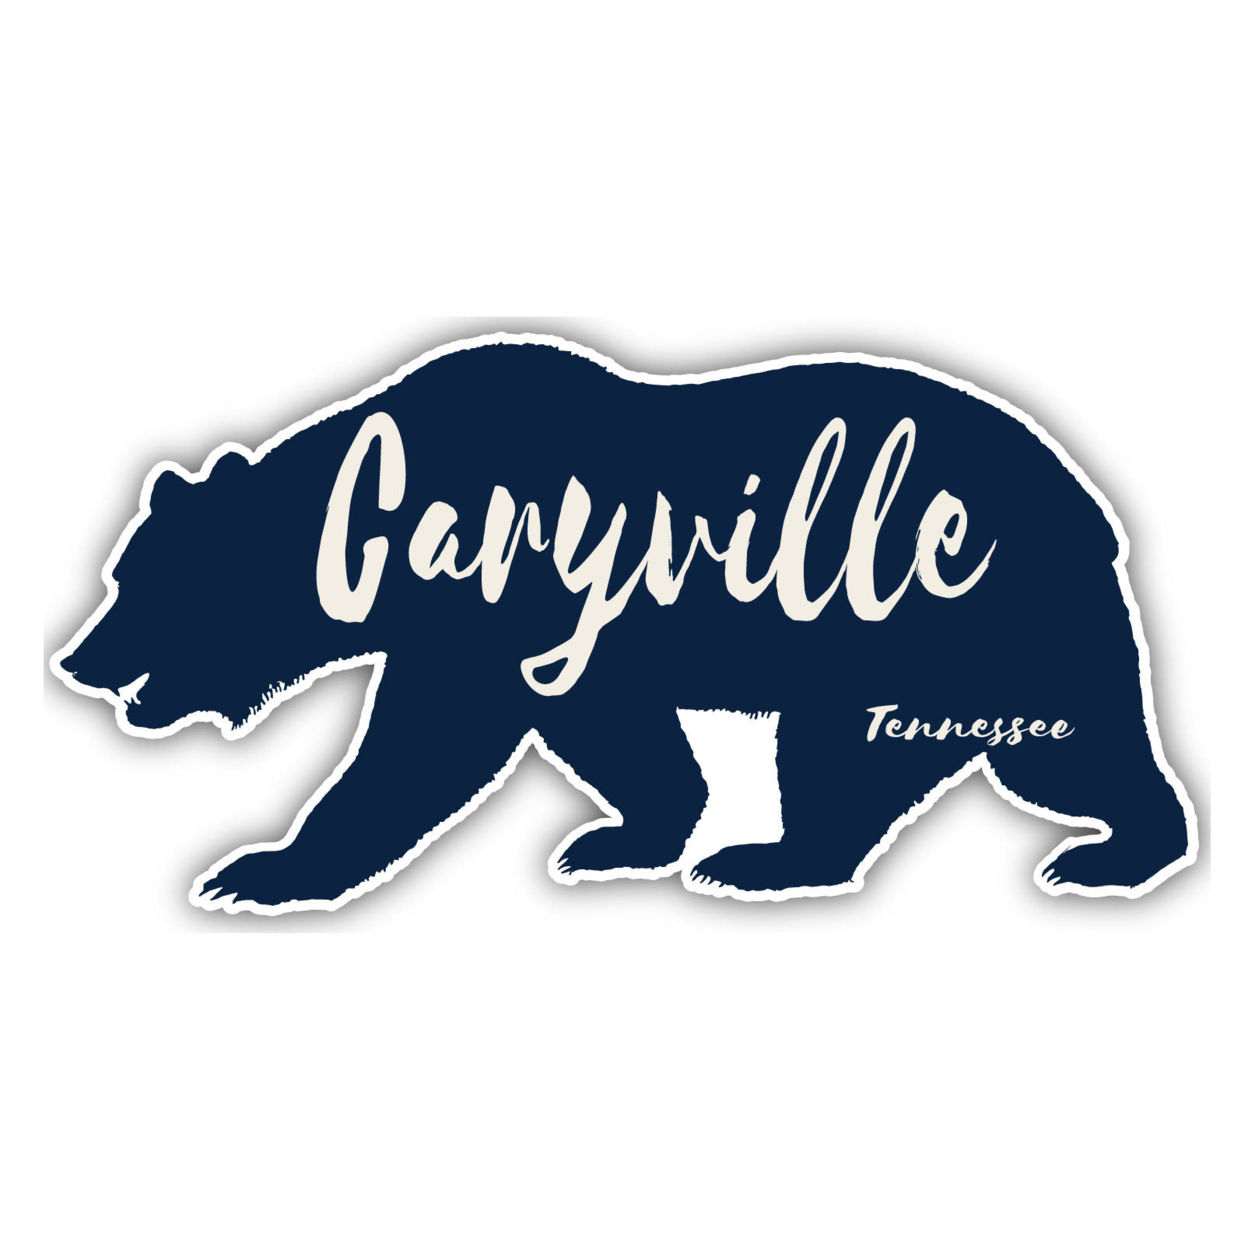 Caryville Tennessee Souvenir Decorative Stickers (Choose Theme And Size) - 4-Pack, 2-Inch, Camp Life